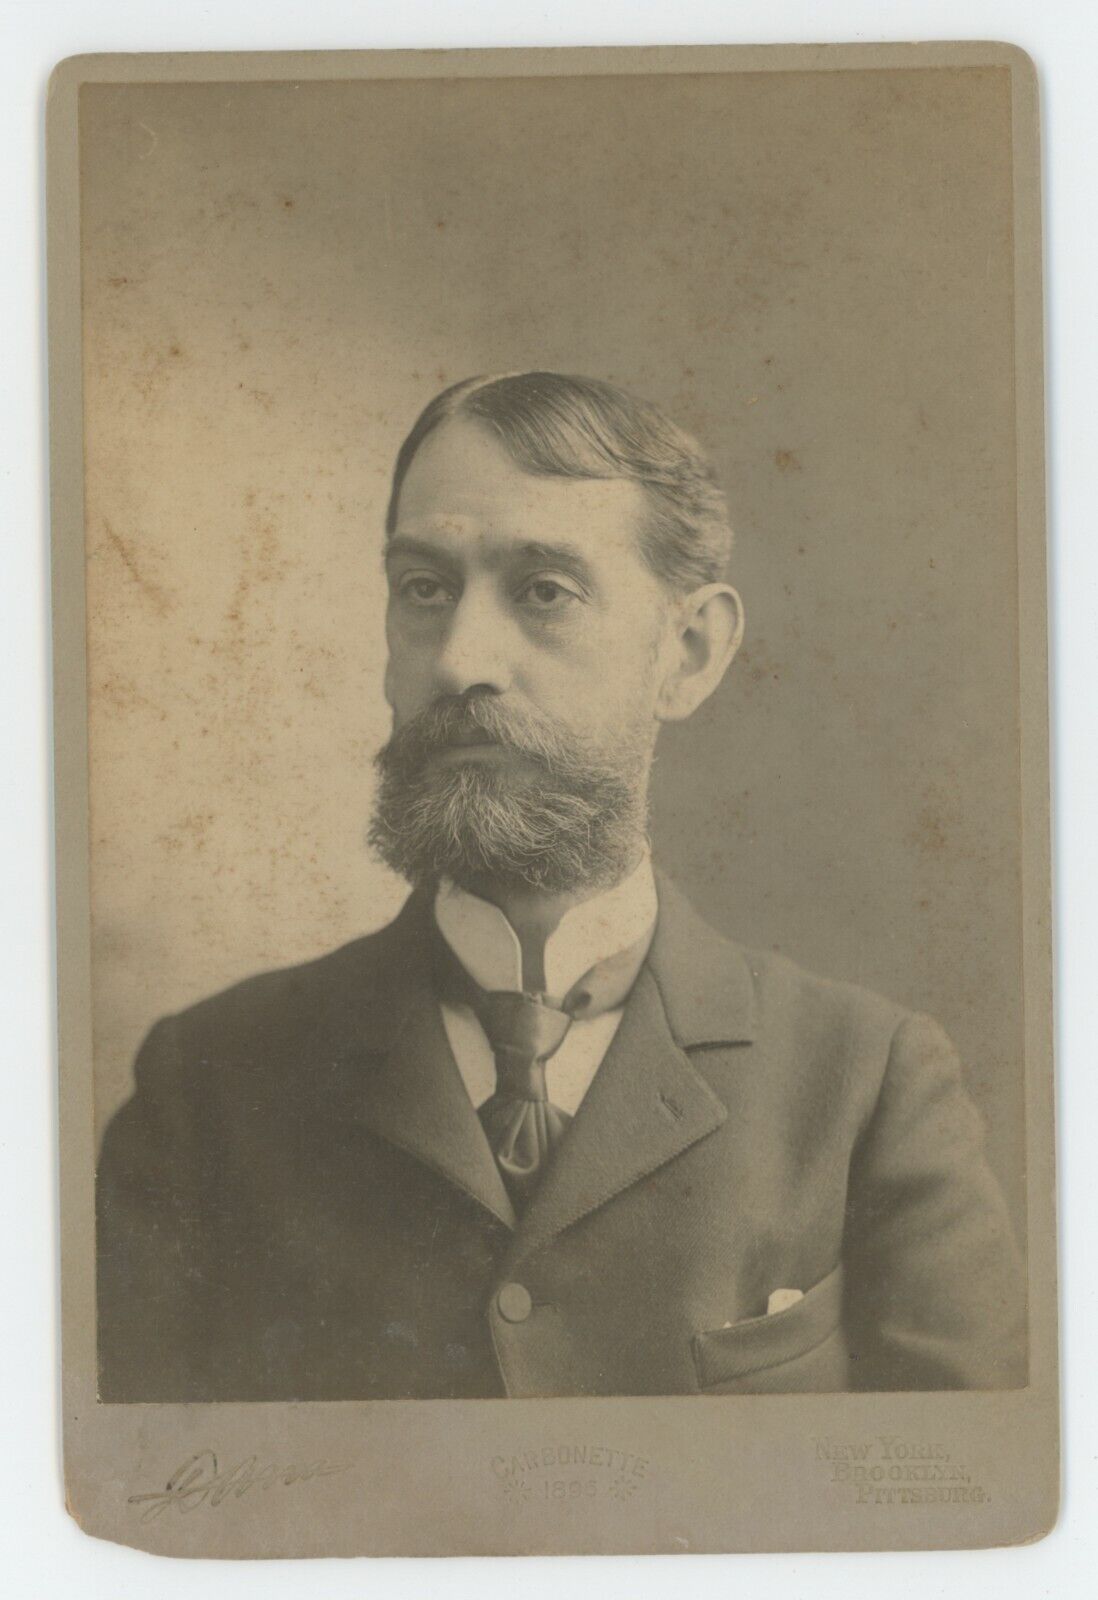 Antique Circa 1890s Cabinet Card Dapper Older Man With Styled Beard Brooklyn, NY